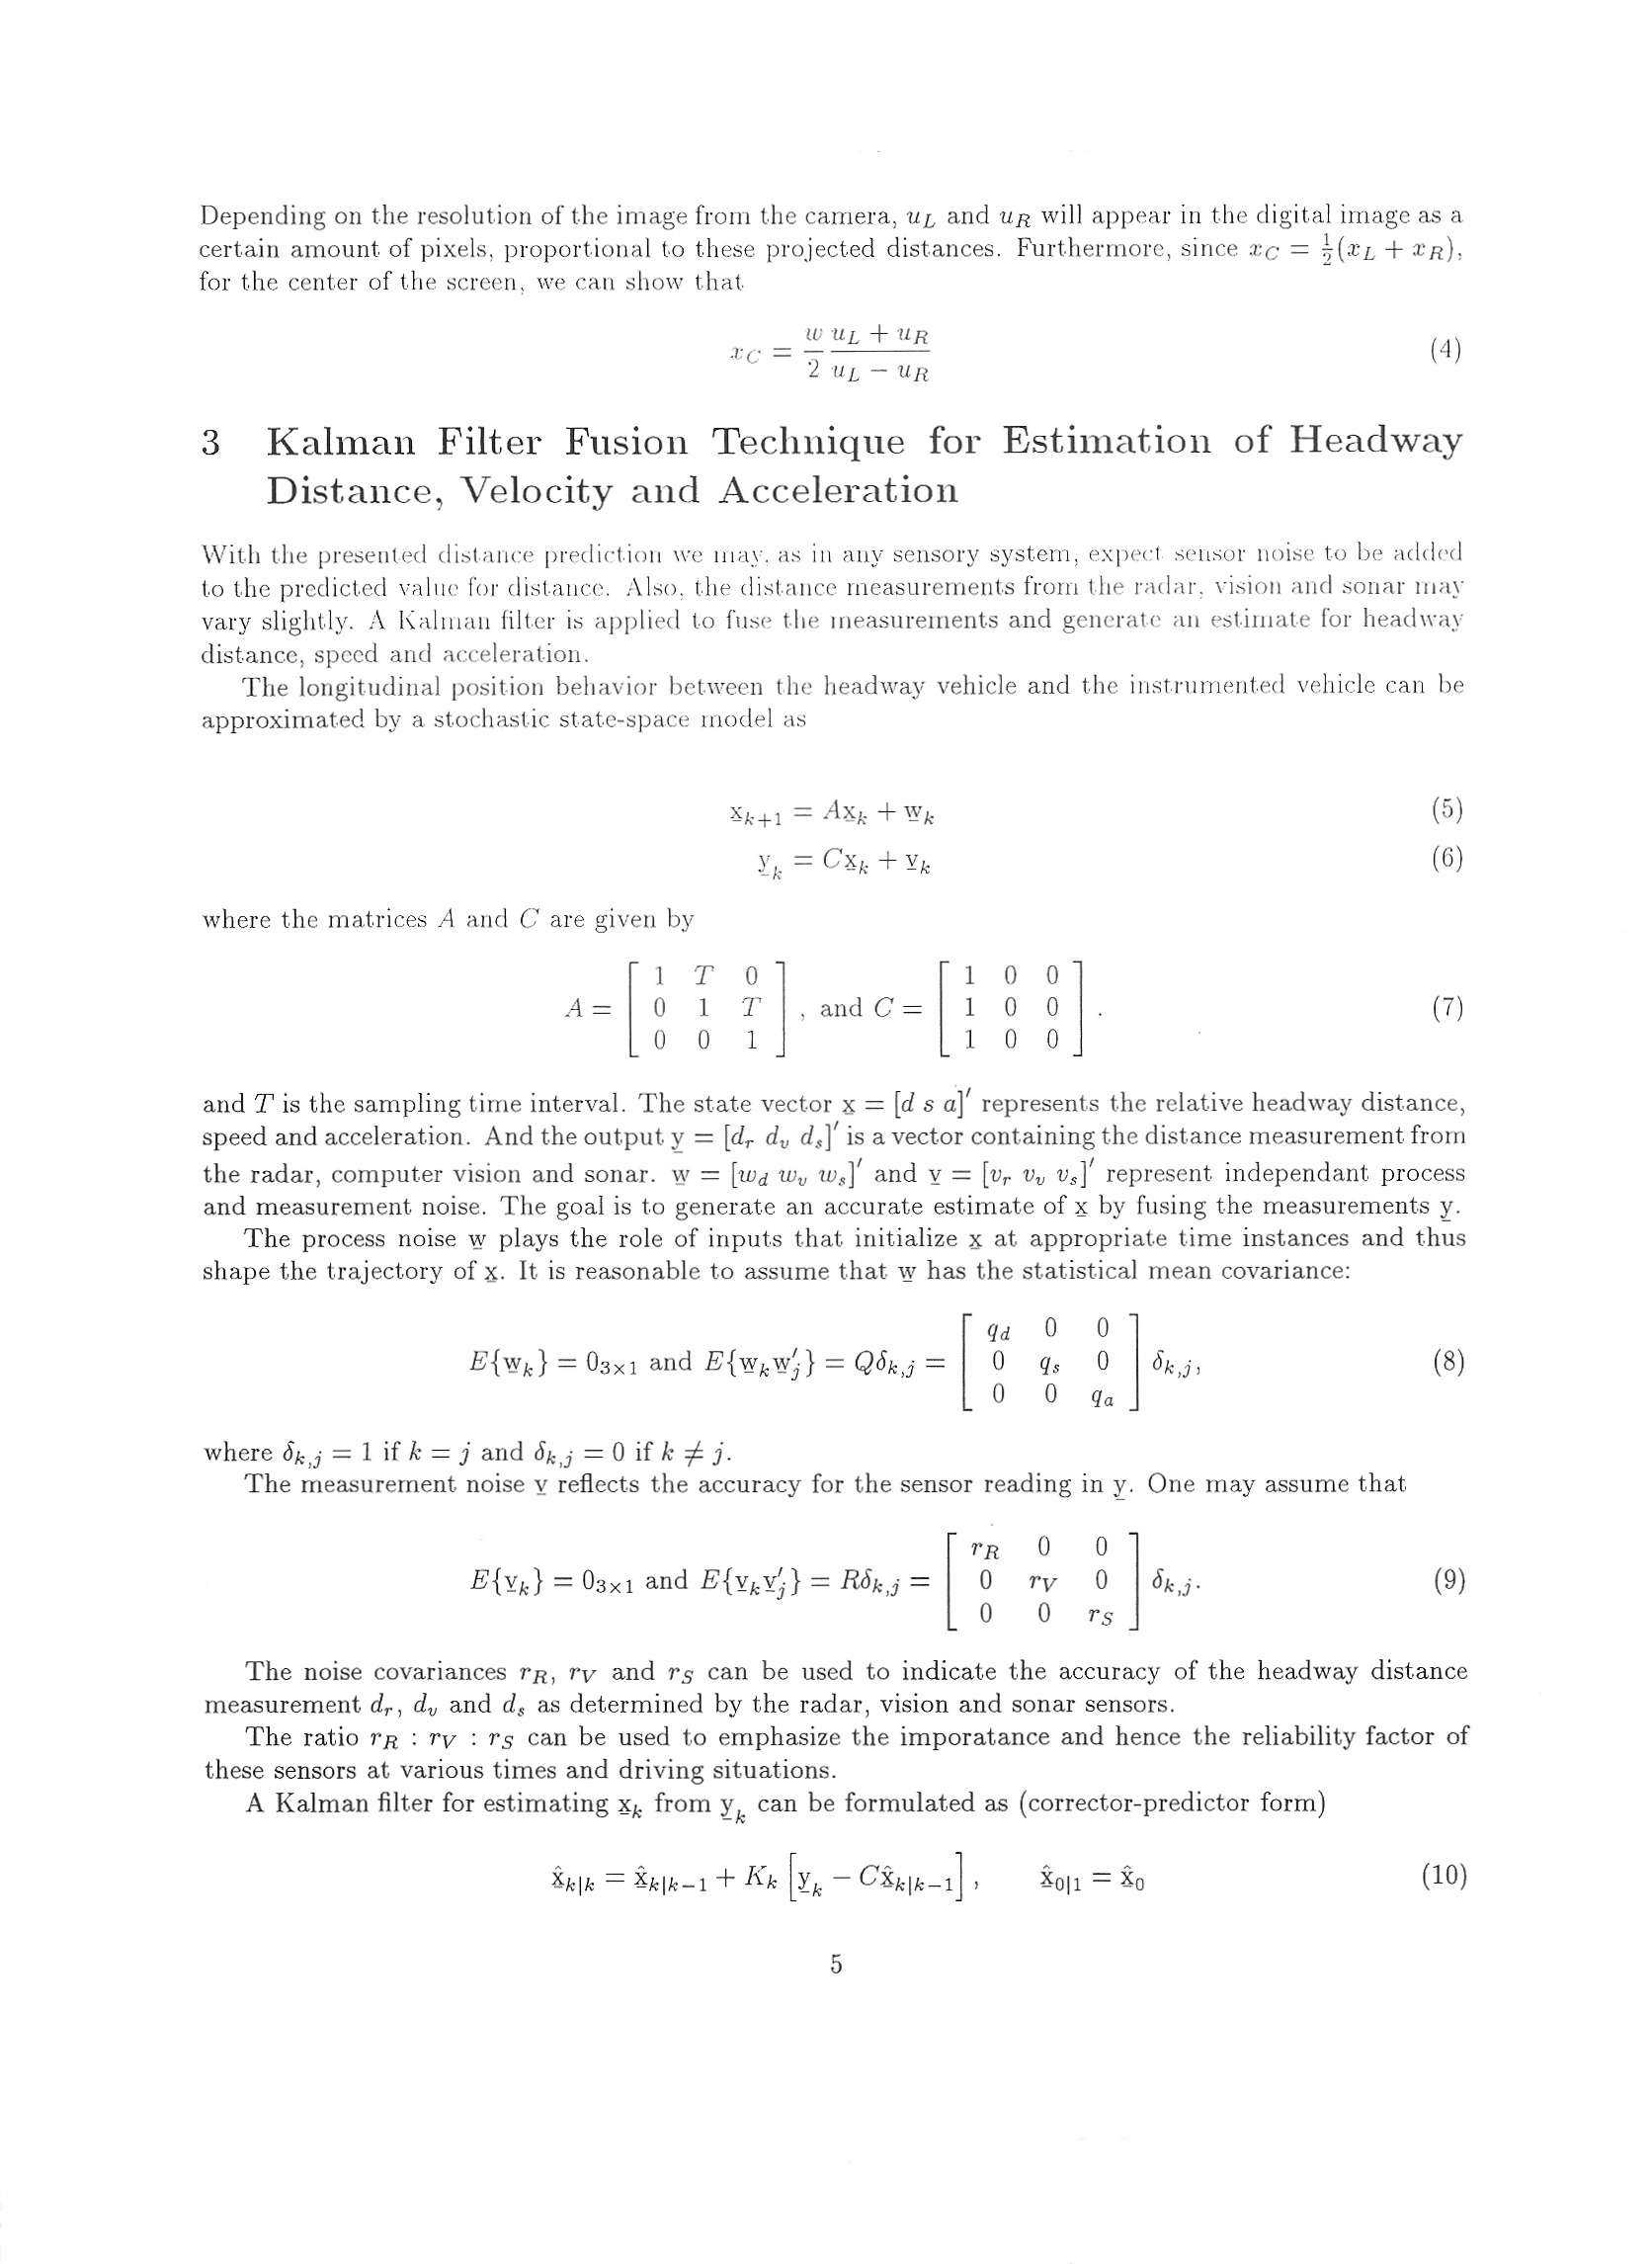 Kalman Filter Fusion Technique for Estimation of Headway Distance, Velocity and Acceleration